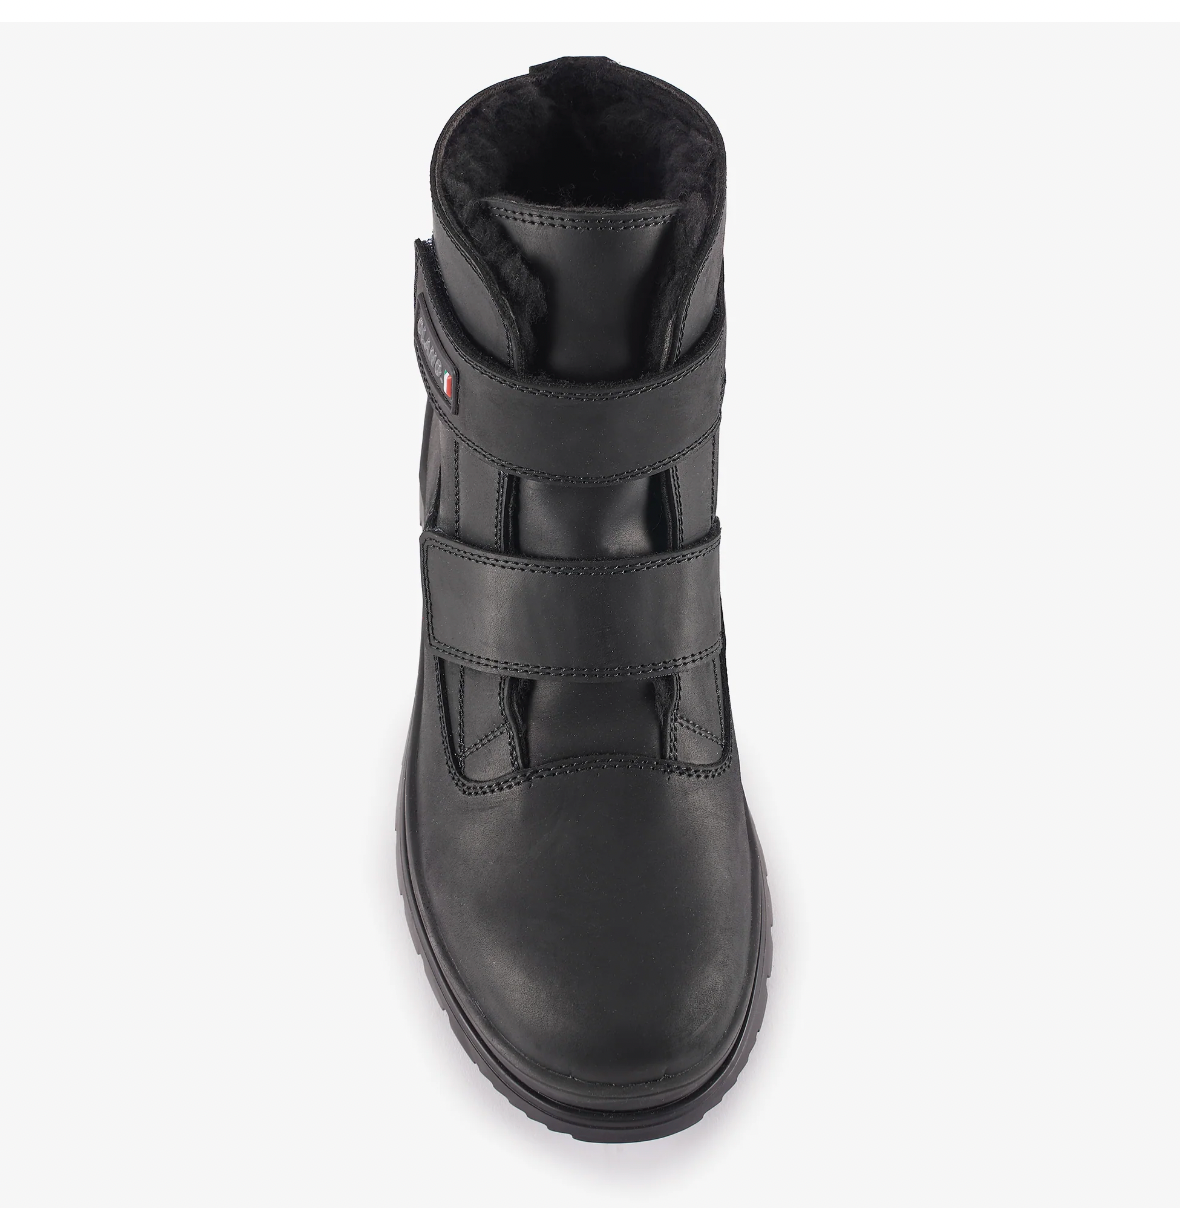 Olang "Amuk" mens black velcro winter boot w/ice cleat -30